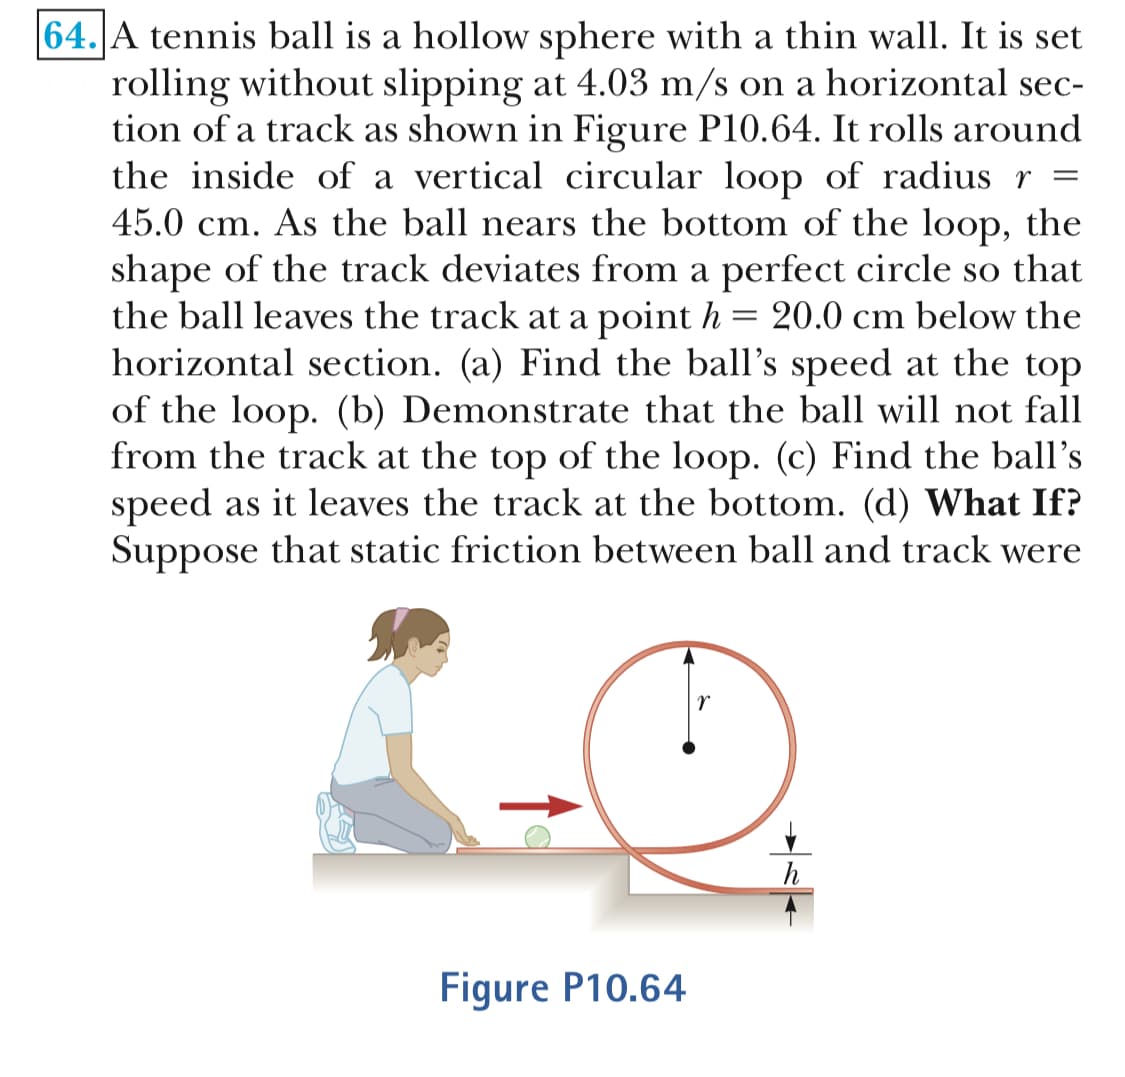 64.A tennis ball is a hollow sphere with a thin wall. It is set
rolling without slipping at 4.03 m/s on a horizontal sec-
tion of a track as shown in Figure P10.64. It rolls around
the inside of a vertical circular loop of radius r-
45.0 cm. As the ball nears the bottom of the loop, the
shape of the track deviates from a perfect circle so that
the ball leaves the track at a point h- 20.0 cm below the
horizontal section. (a) Find the ball's speed at the top
of the loop. (b) Demonstrate that the ball will not fall
from the track at the top of the loop. (c) Find the ball's
speed as it leaves the track at the bottom. (d) What If?
Suppose that static friction between ball and track were
Figure P10.64
